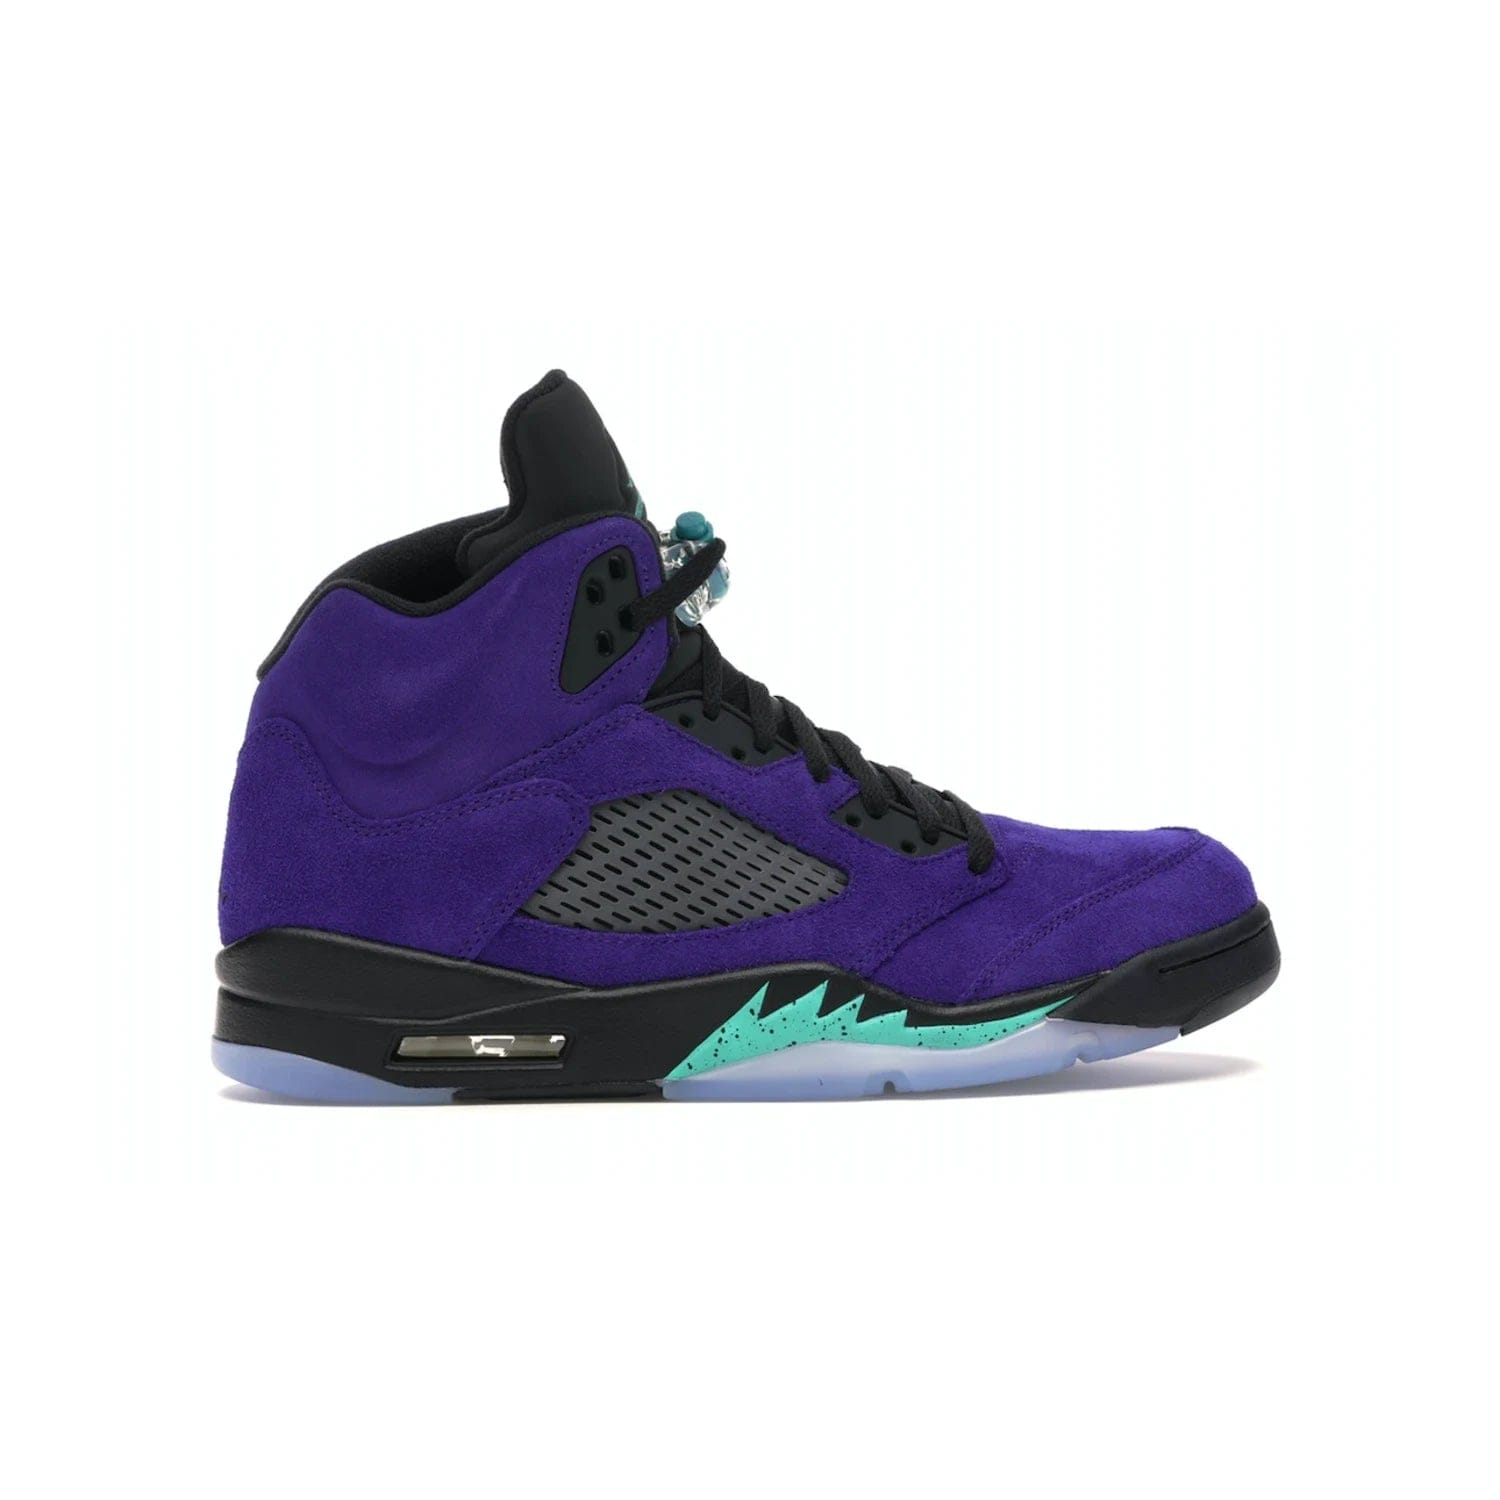 Jordan 5 Retro Alternate Grape - Image 36 - Only at www.BallersClubKickz.com - Bring the classic Jordan 5 Retro Alternate Grape to your sneaker collection! Featuring a purple suede upper, charcoal underlays, green detailing, and an icy and green outsole. Releasing for the first time since 1990, don't miss this chance to add a piece of sneaker history to your collection.